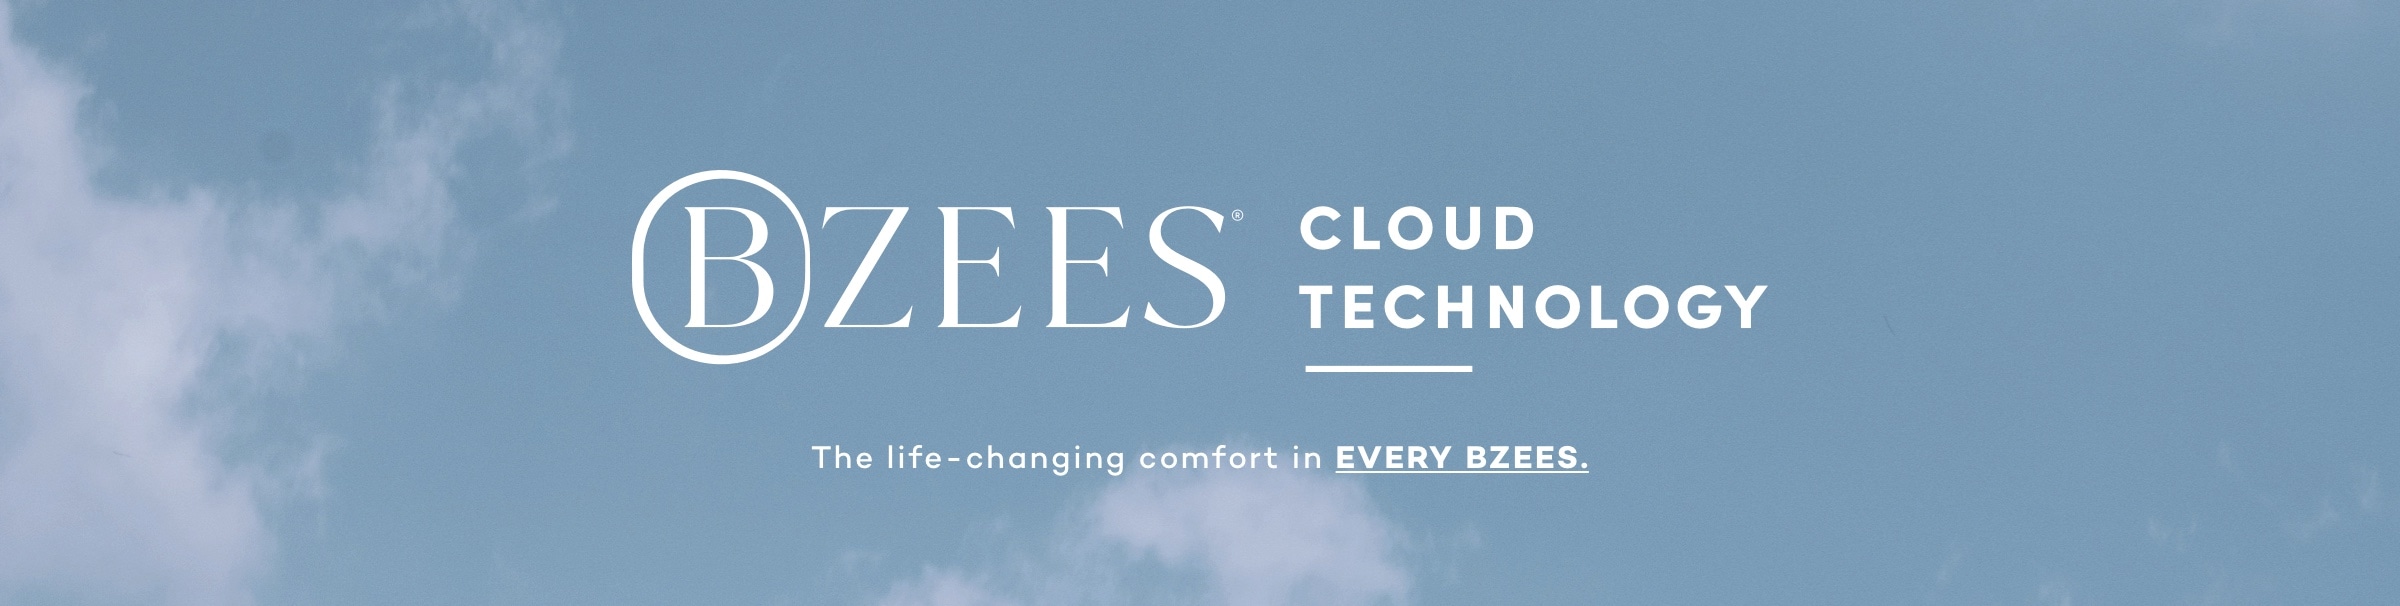  bzees cloud technology. the life changing comfort in every bzees